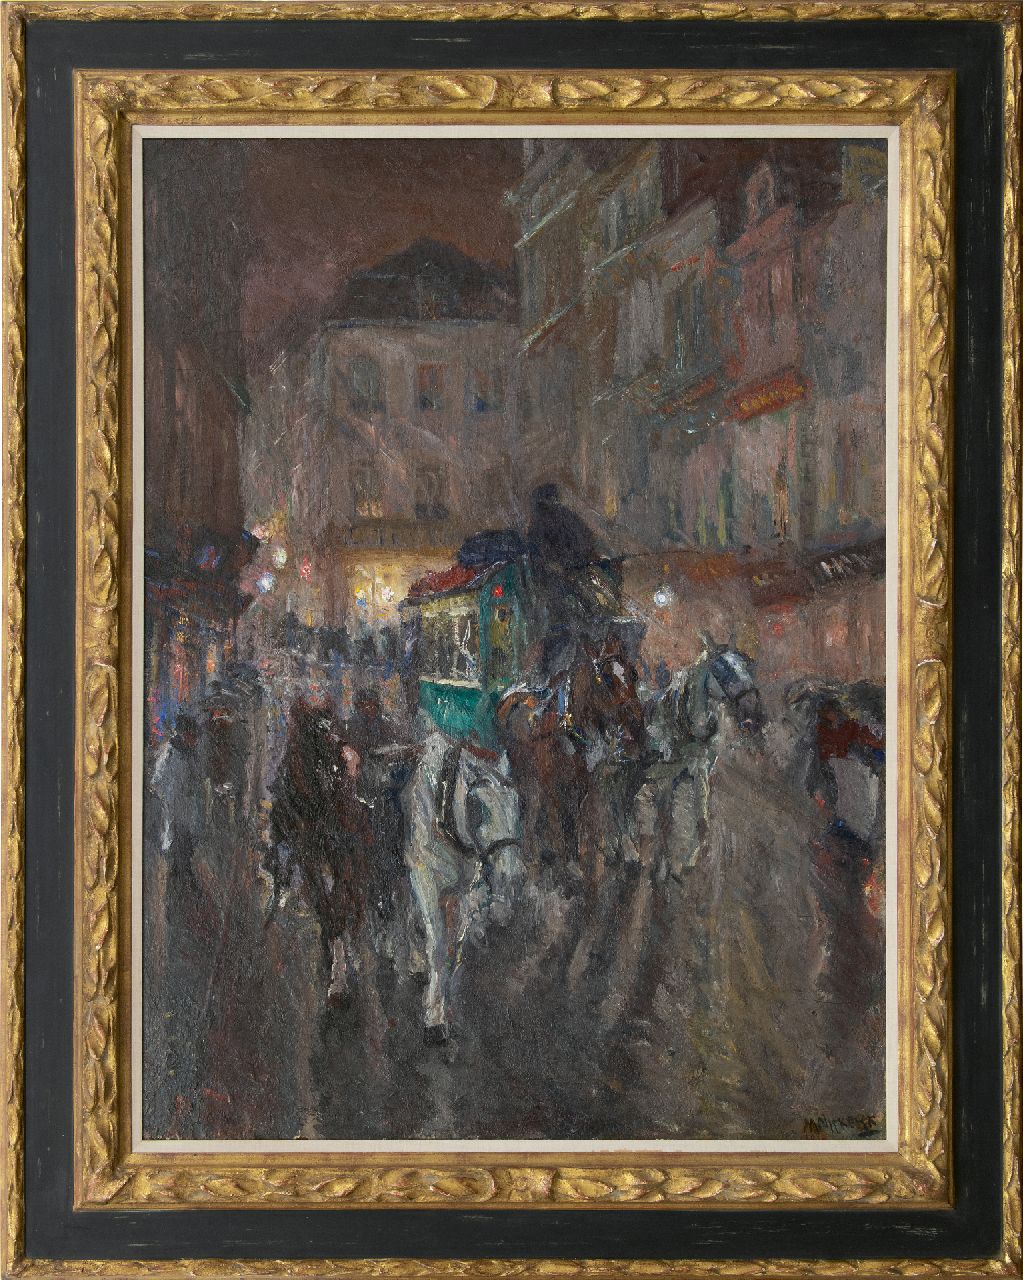 Niekerk M.J.  | 'Maurits' Joseph Niekerk | Paintings offered for sale | An omnibus in the city at night, oil on canvas 115.5 x 85.3 cm, signed l.r. and dated 1919